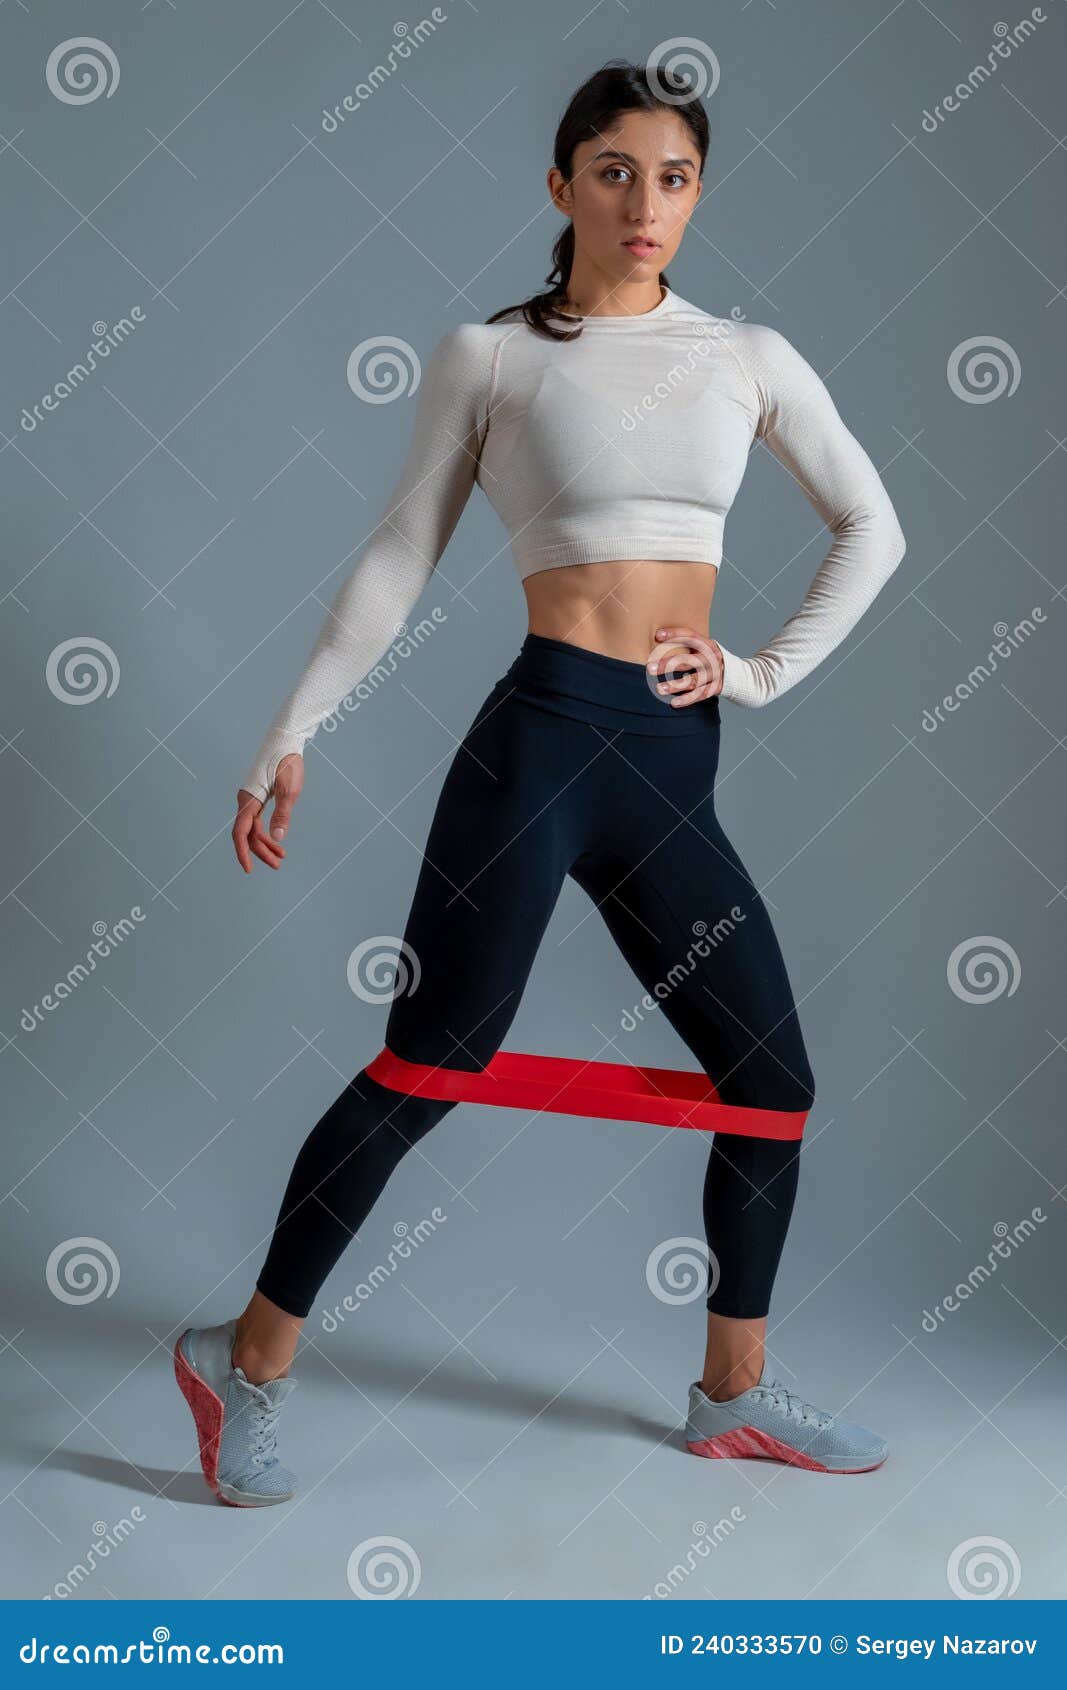 Premium Photo  Woman uses elastic band for workout dressed in activewear  poses on fitnes mat on shoulders wears activewear smartwatch sneakers poses  outside in urban surroundings